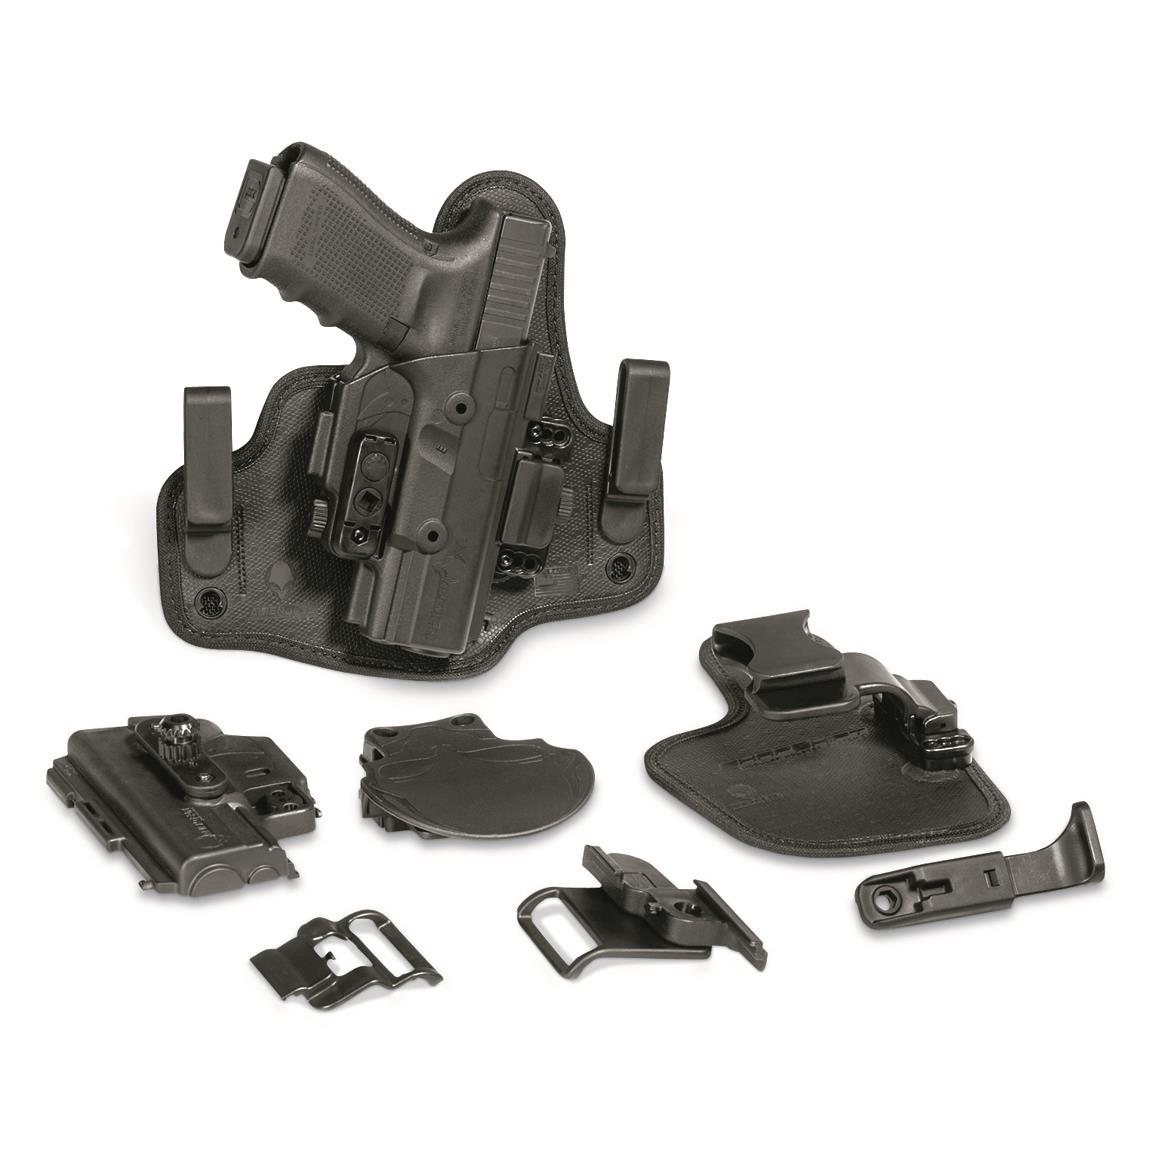 Alien Gear ShapeShift Holster Core Carry Pack, Smith & Wesson M&P 9mm 4.25"